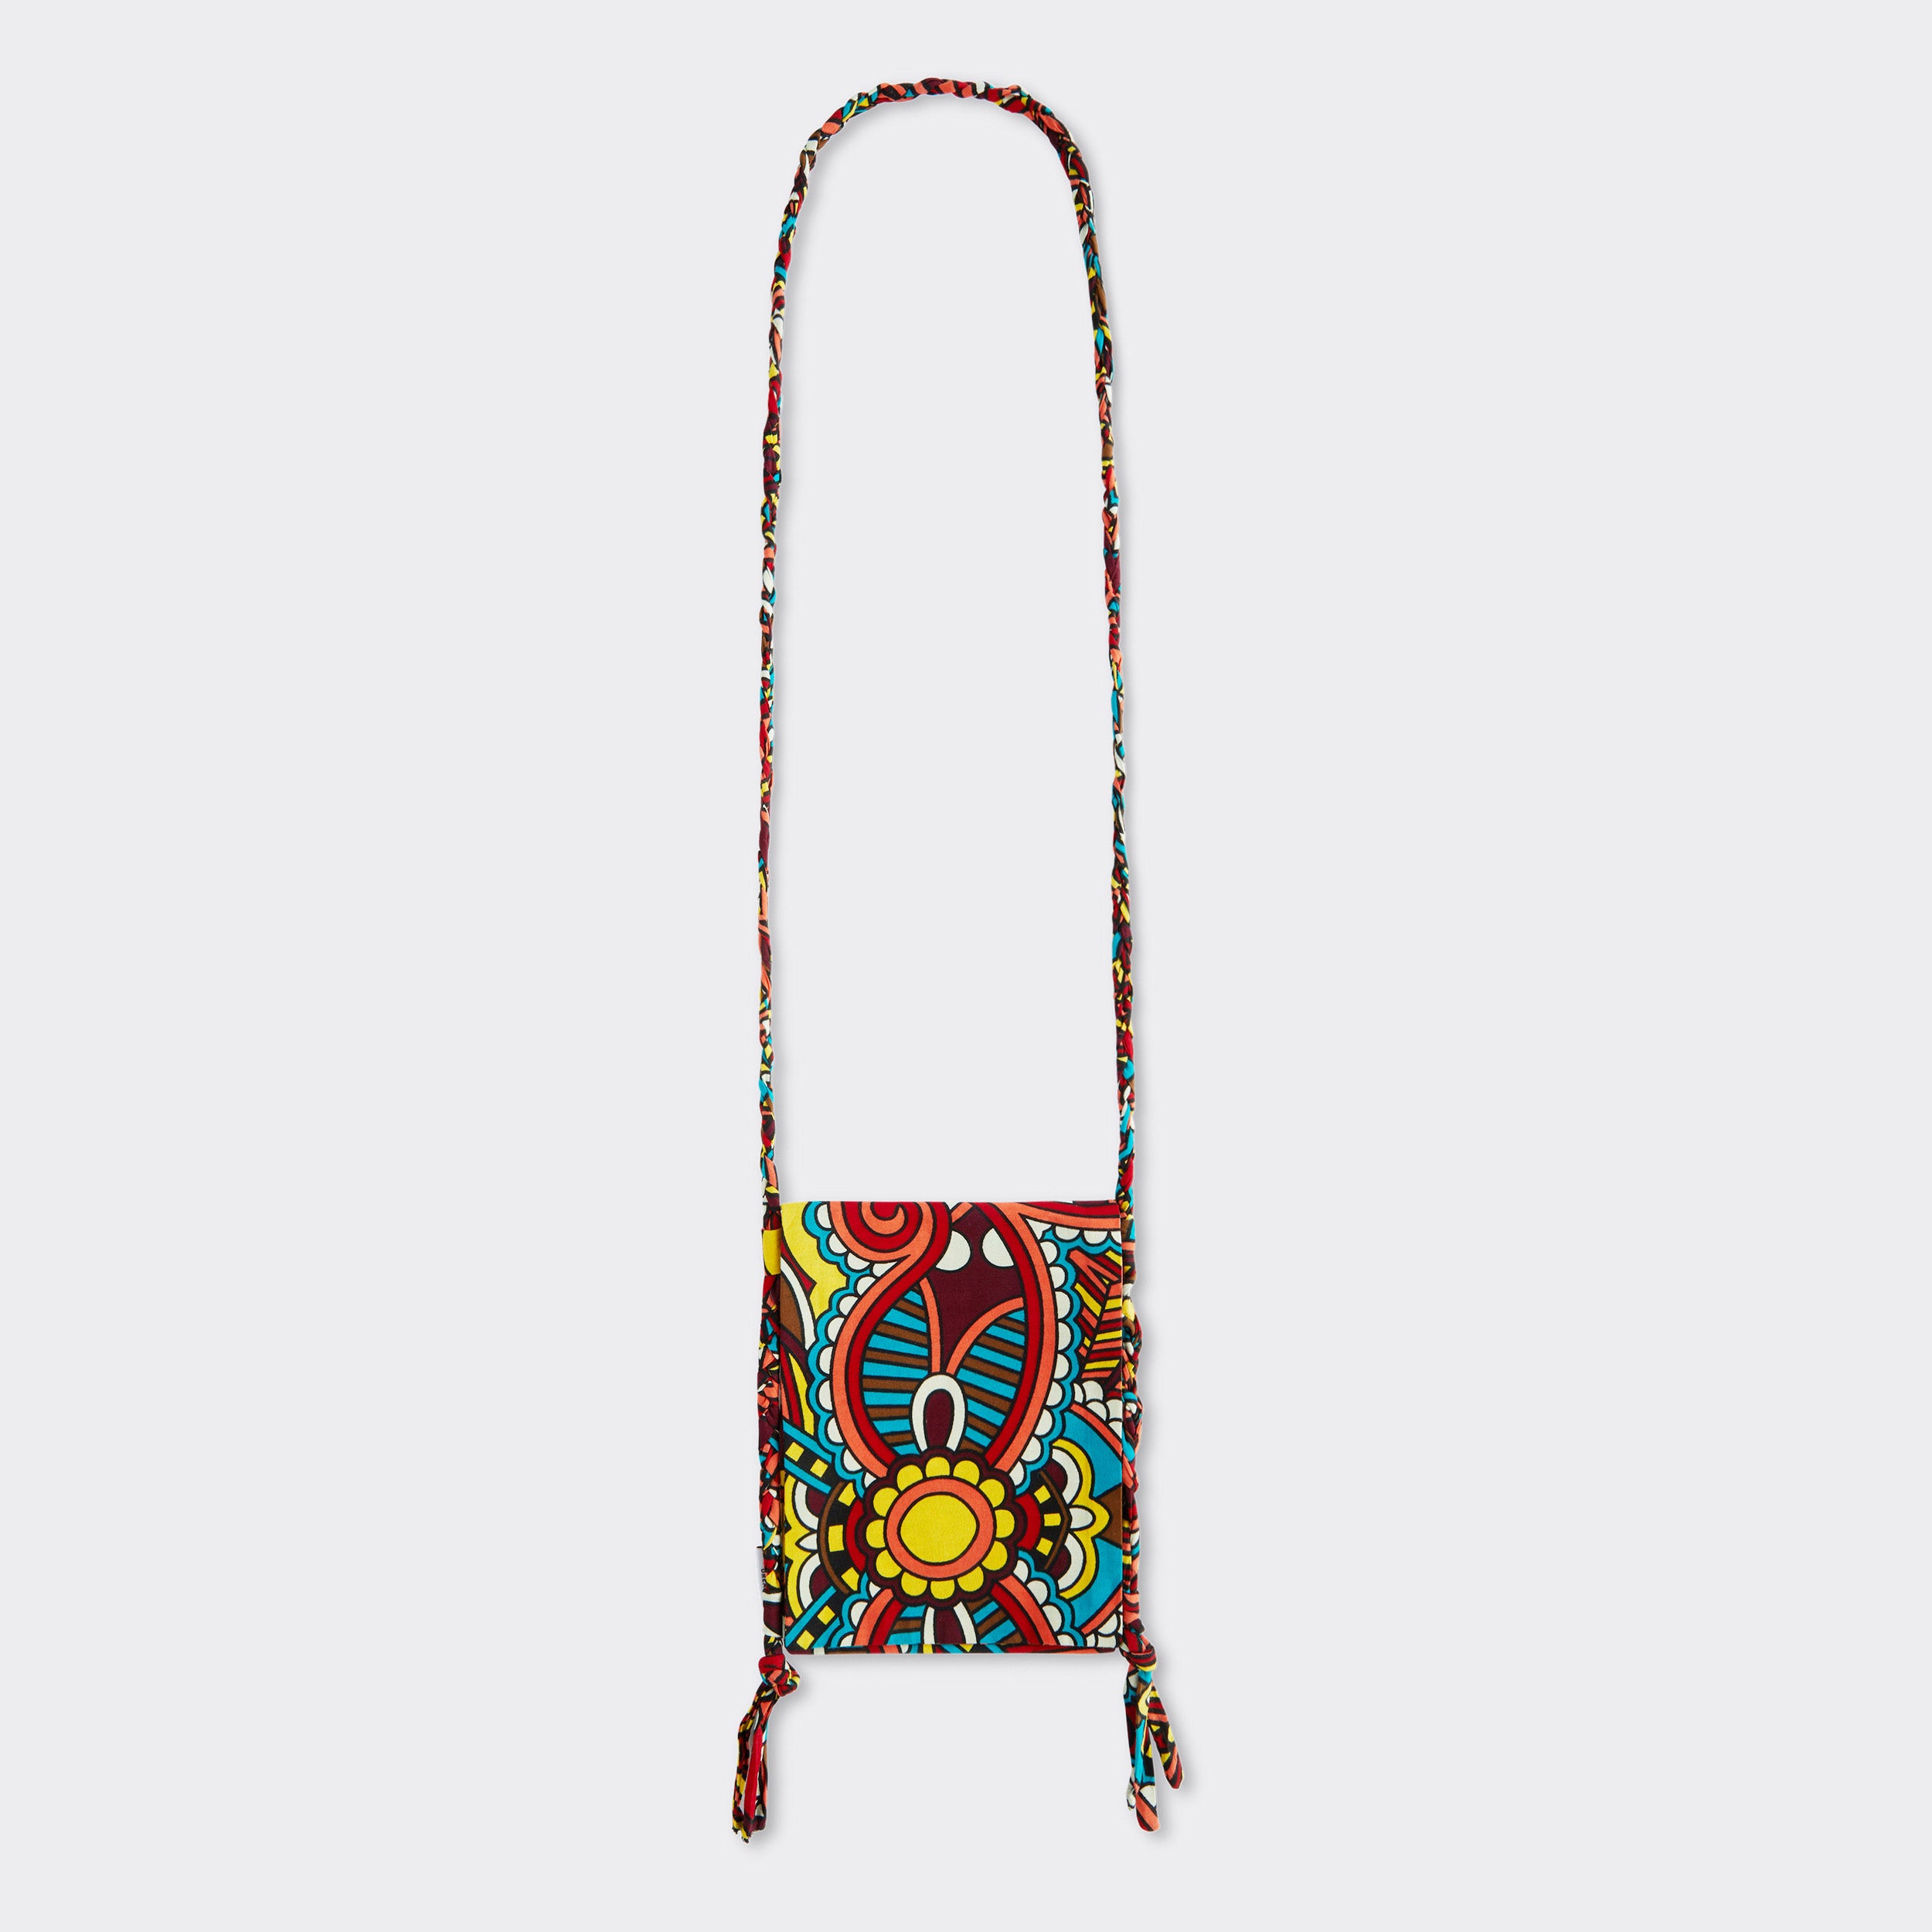 Still life: Crossbody Mini Bag in Wax African Dream with colors red, blue, and yellow